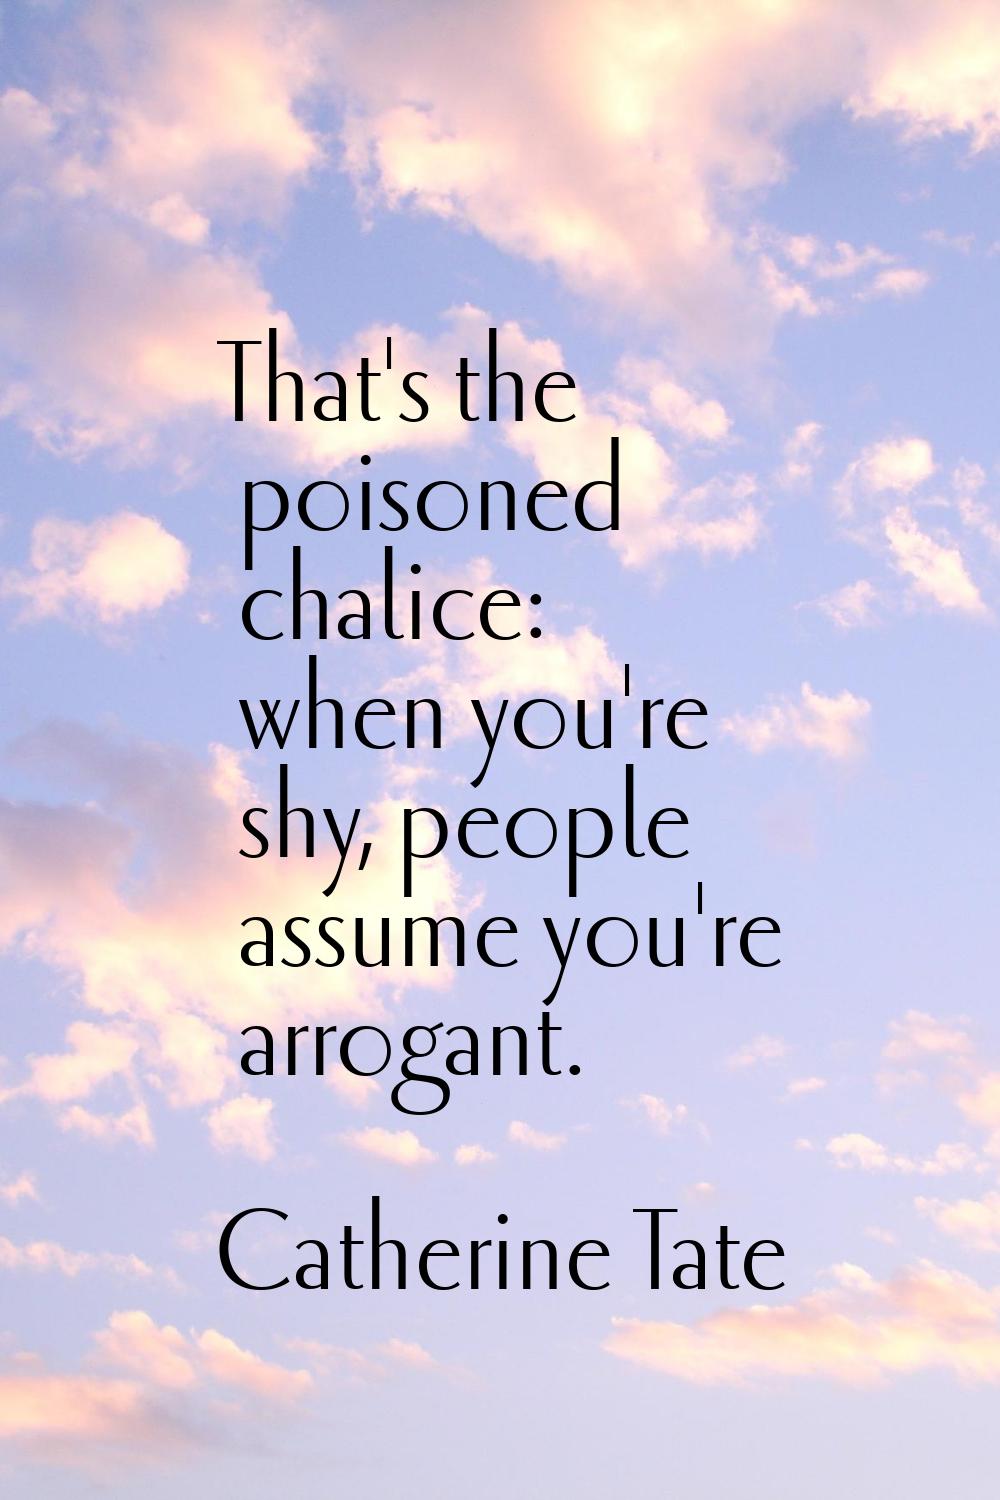 That's the poisoned chalice: when you're shy, people assume you're arrogant.